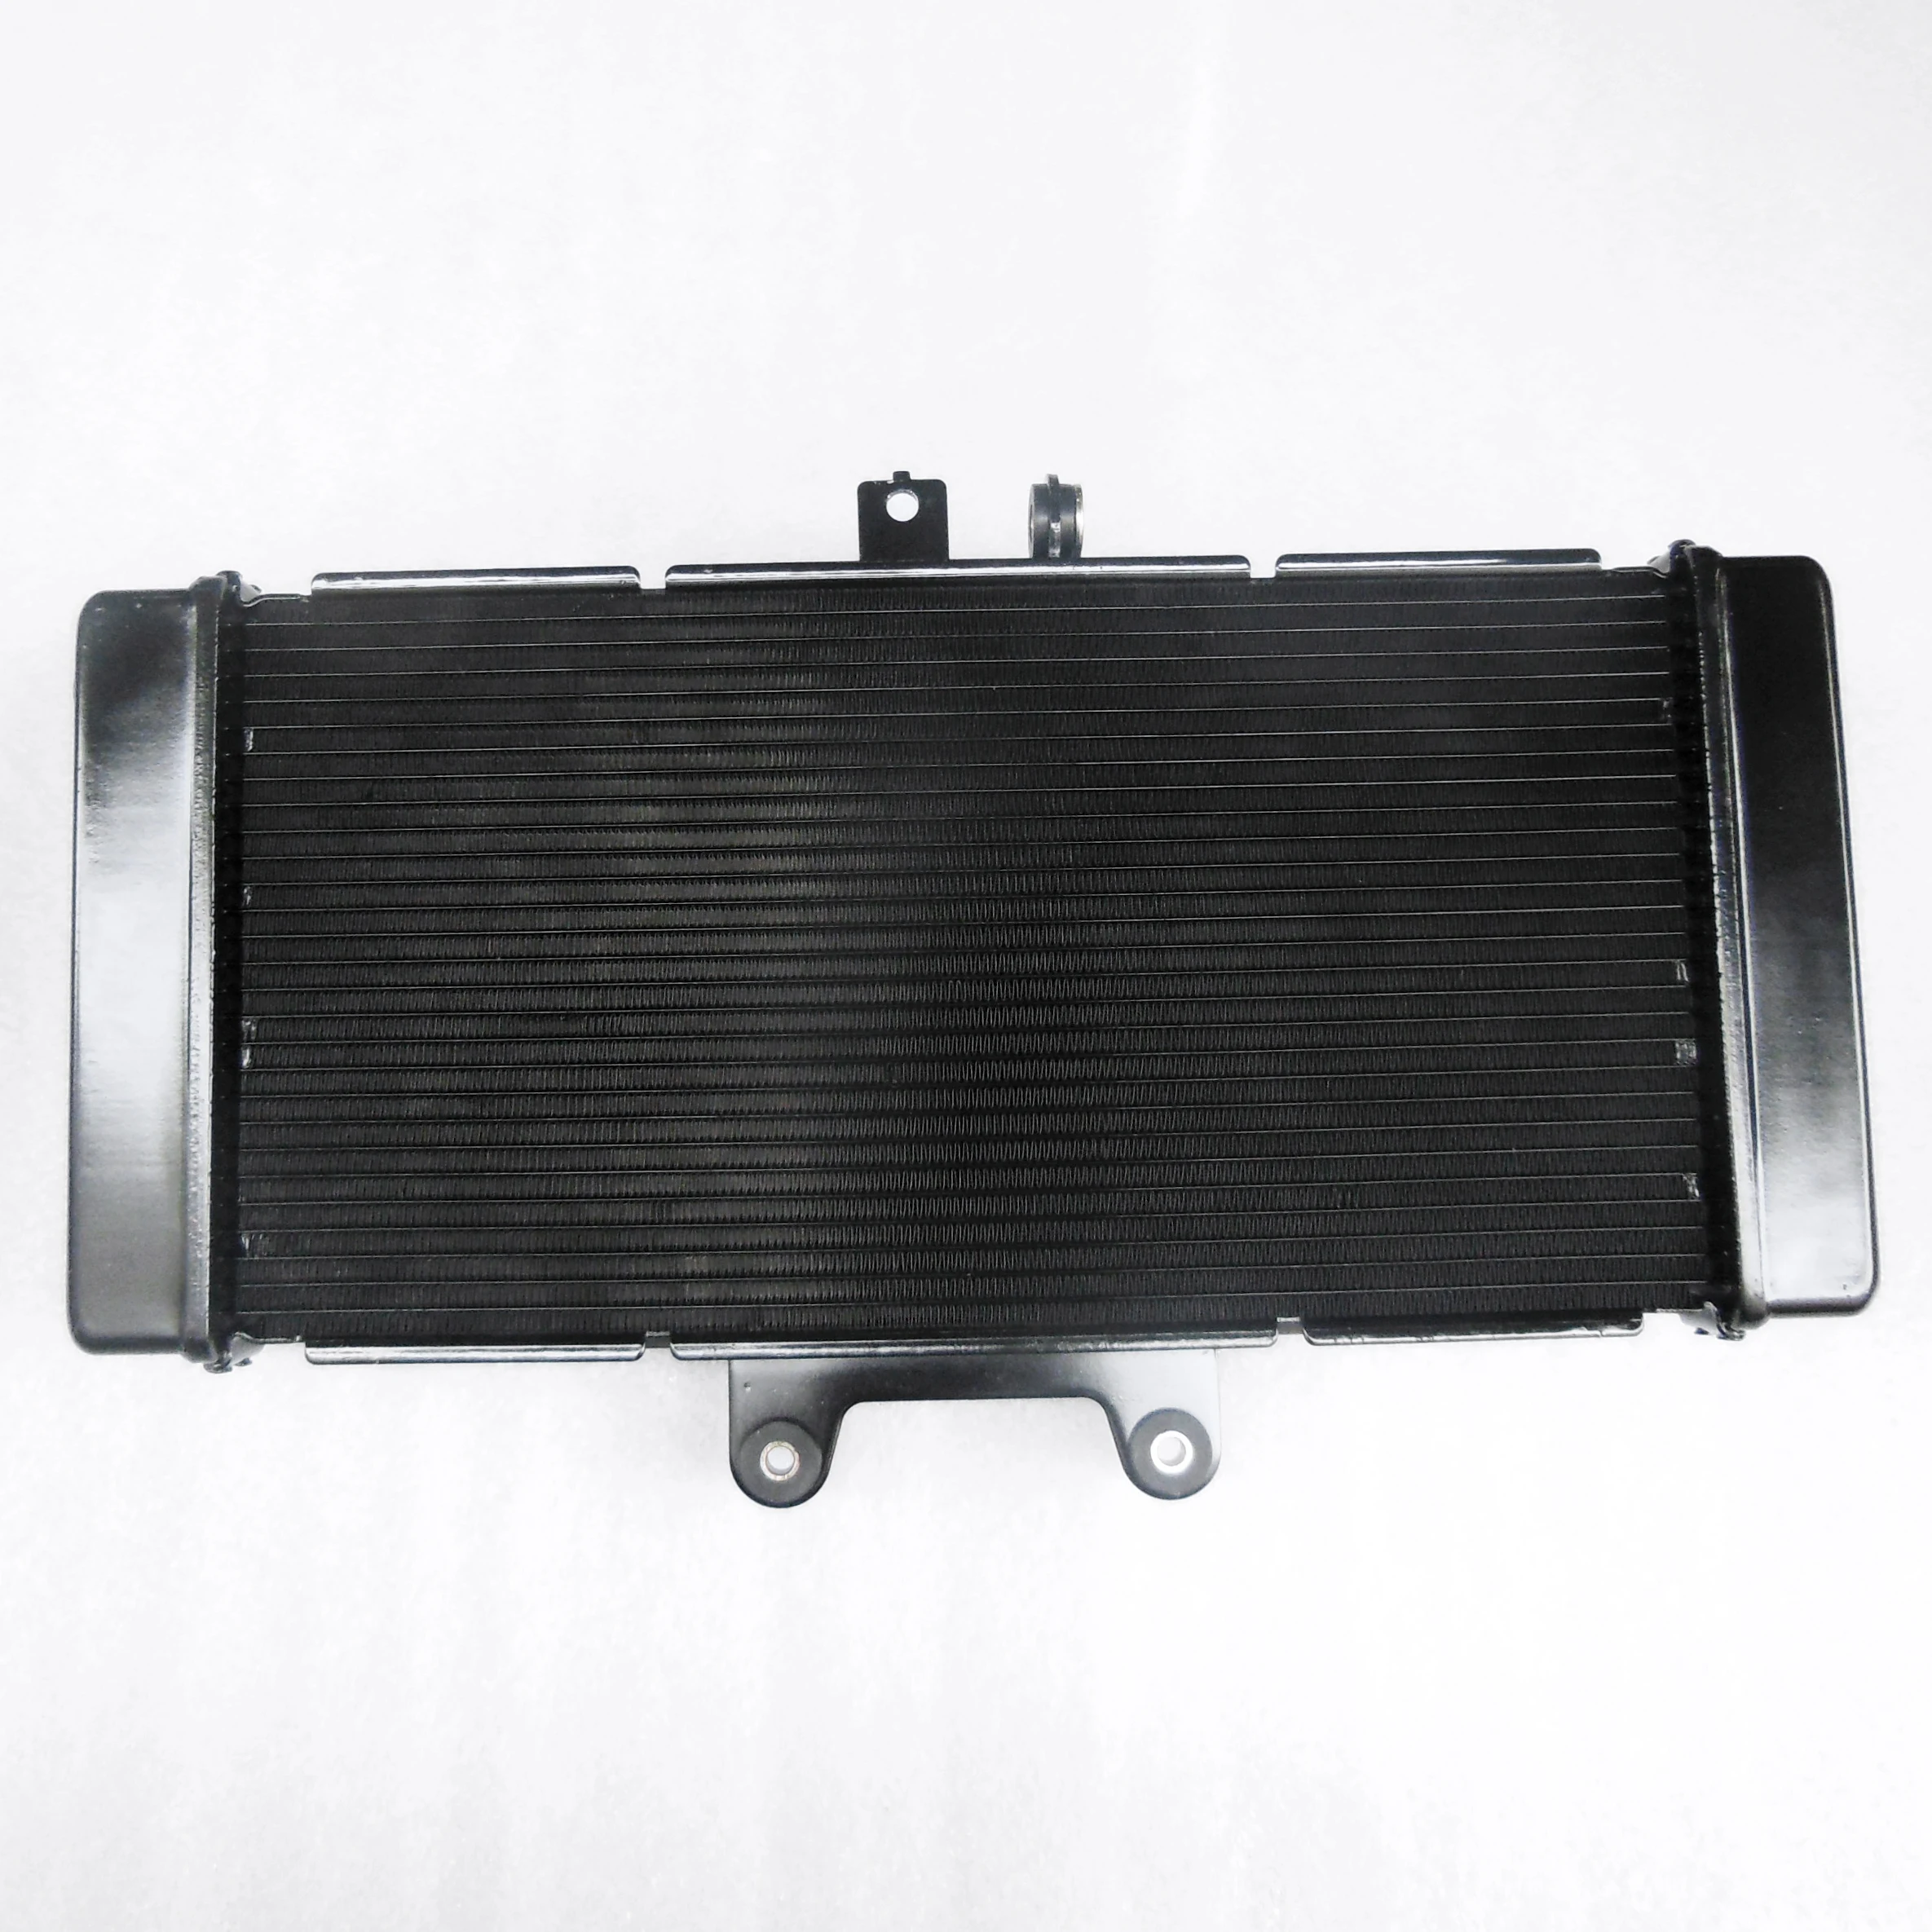 Aluminium Motorcycle Replacement Radiator Cooler  Fit For SUZUKI GSF650 GSX650F Bandit 2008 - 2013 GSF 650 F 2009 2010 2011 2012